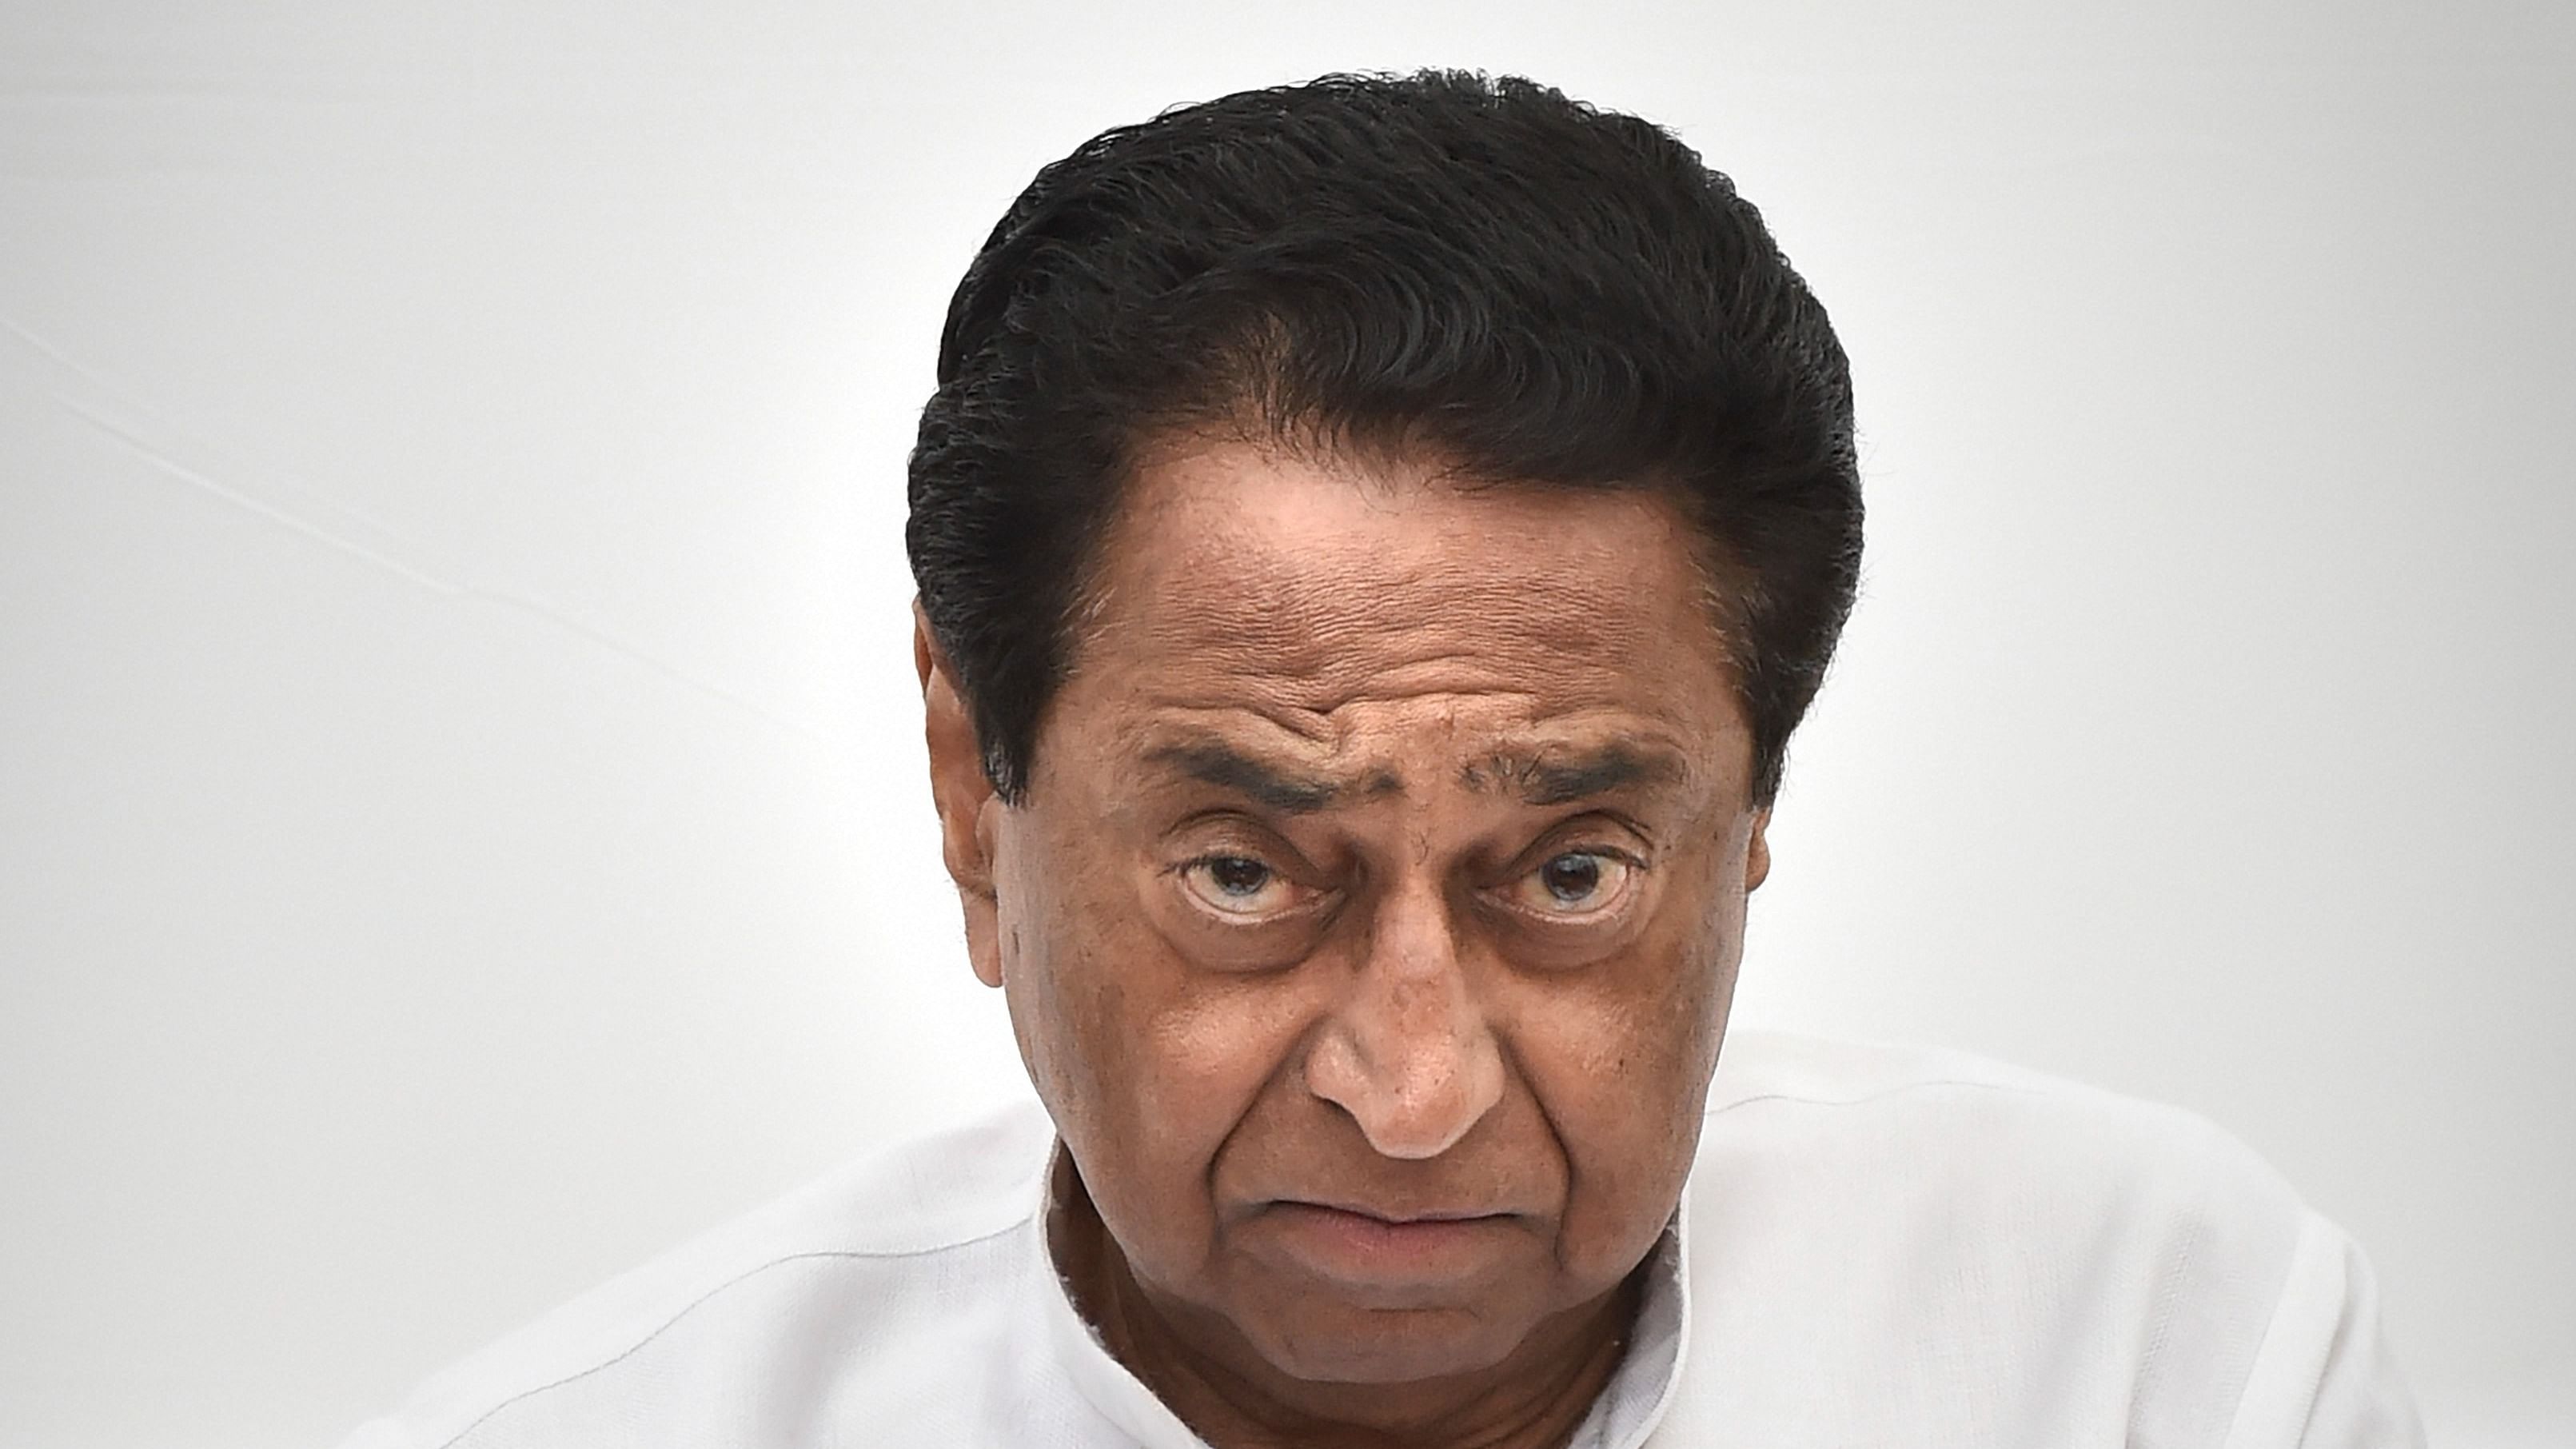 The new AICC chief will have to first focus on Gujarat and Himachal Pradesh, where elections are scheduled soon, and there will be a need to prepare a strategy for every state, the former Madhya Pradesh chief minister said. Credit: PTI Photo